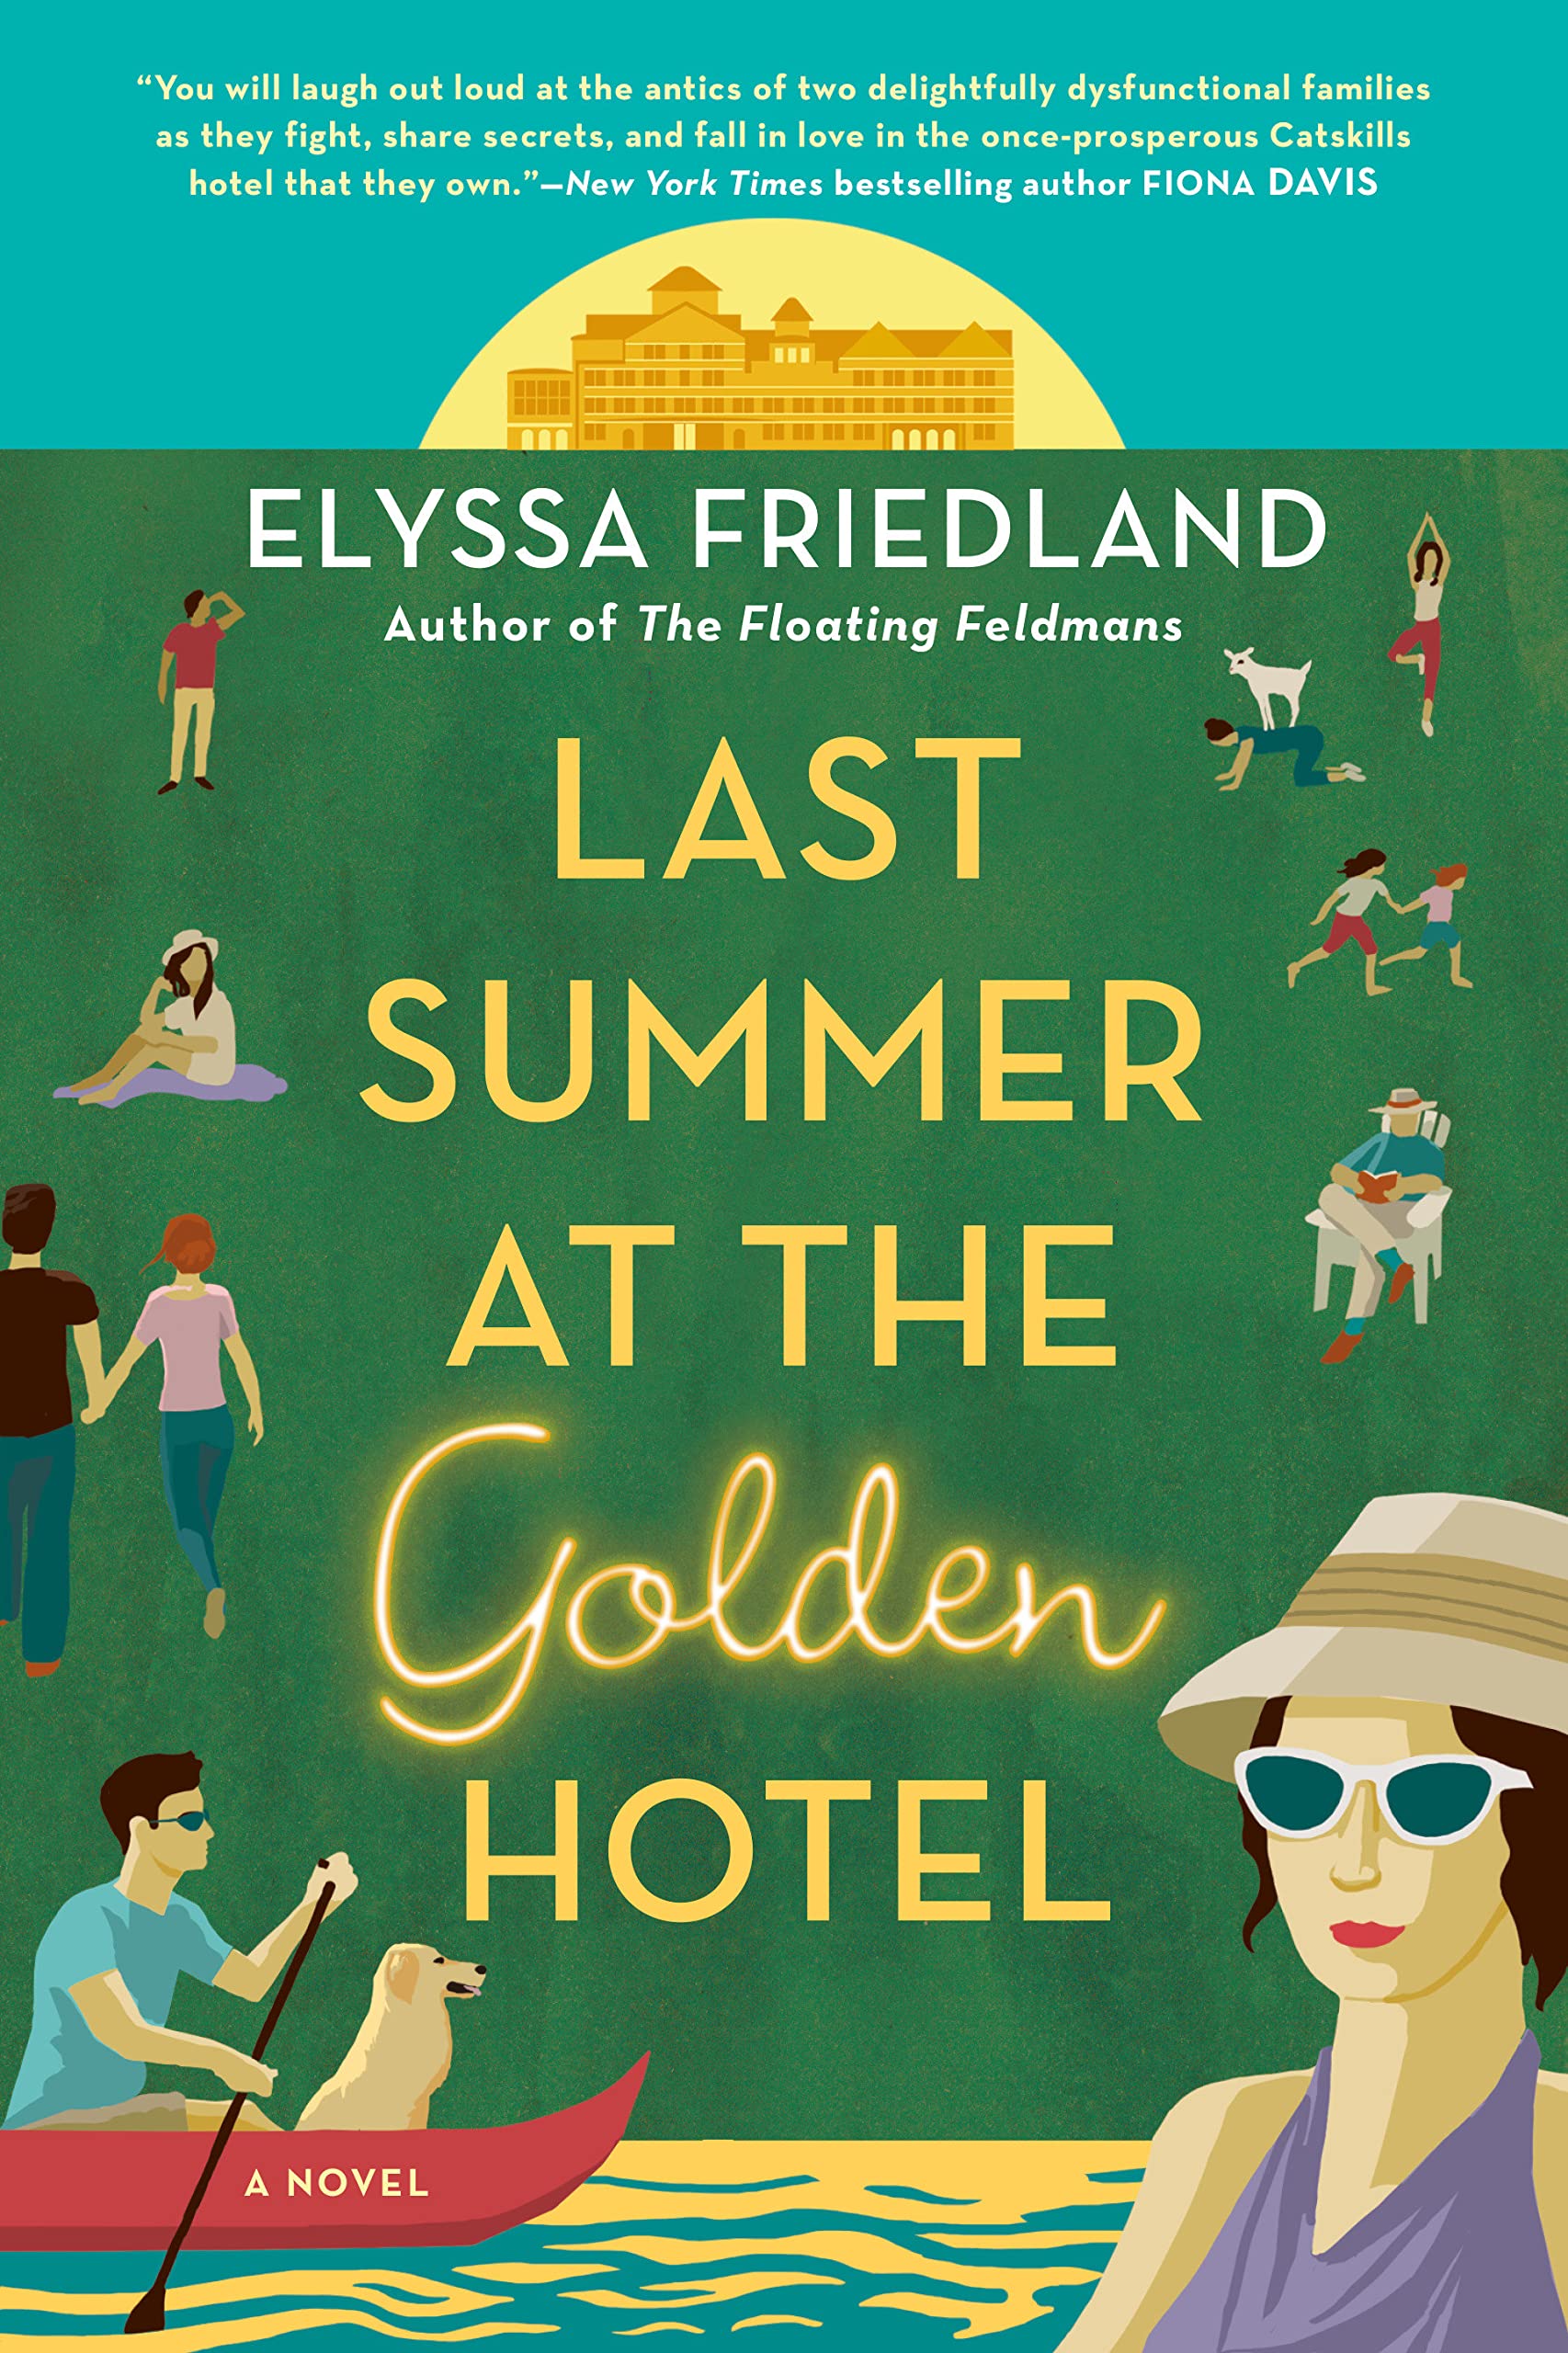 Cover of Last Summer at the Golden Hotel. A person in a hat stands in the foreground while another canoes with a dog behind her. Multiple people in the background are enjoying the outdoors with the hotel behind them in the sunrise/sunset.